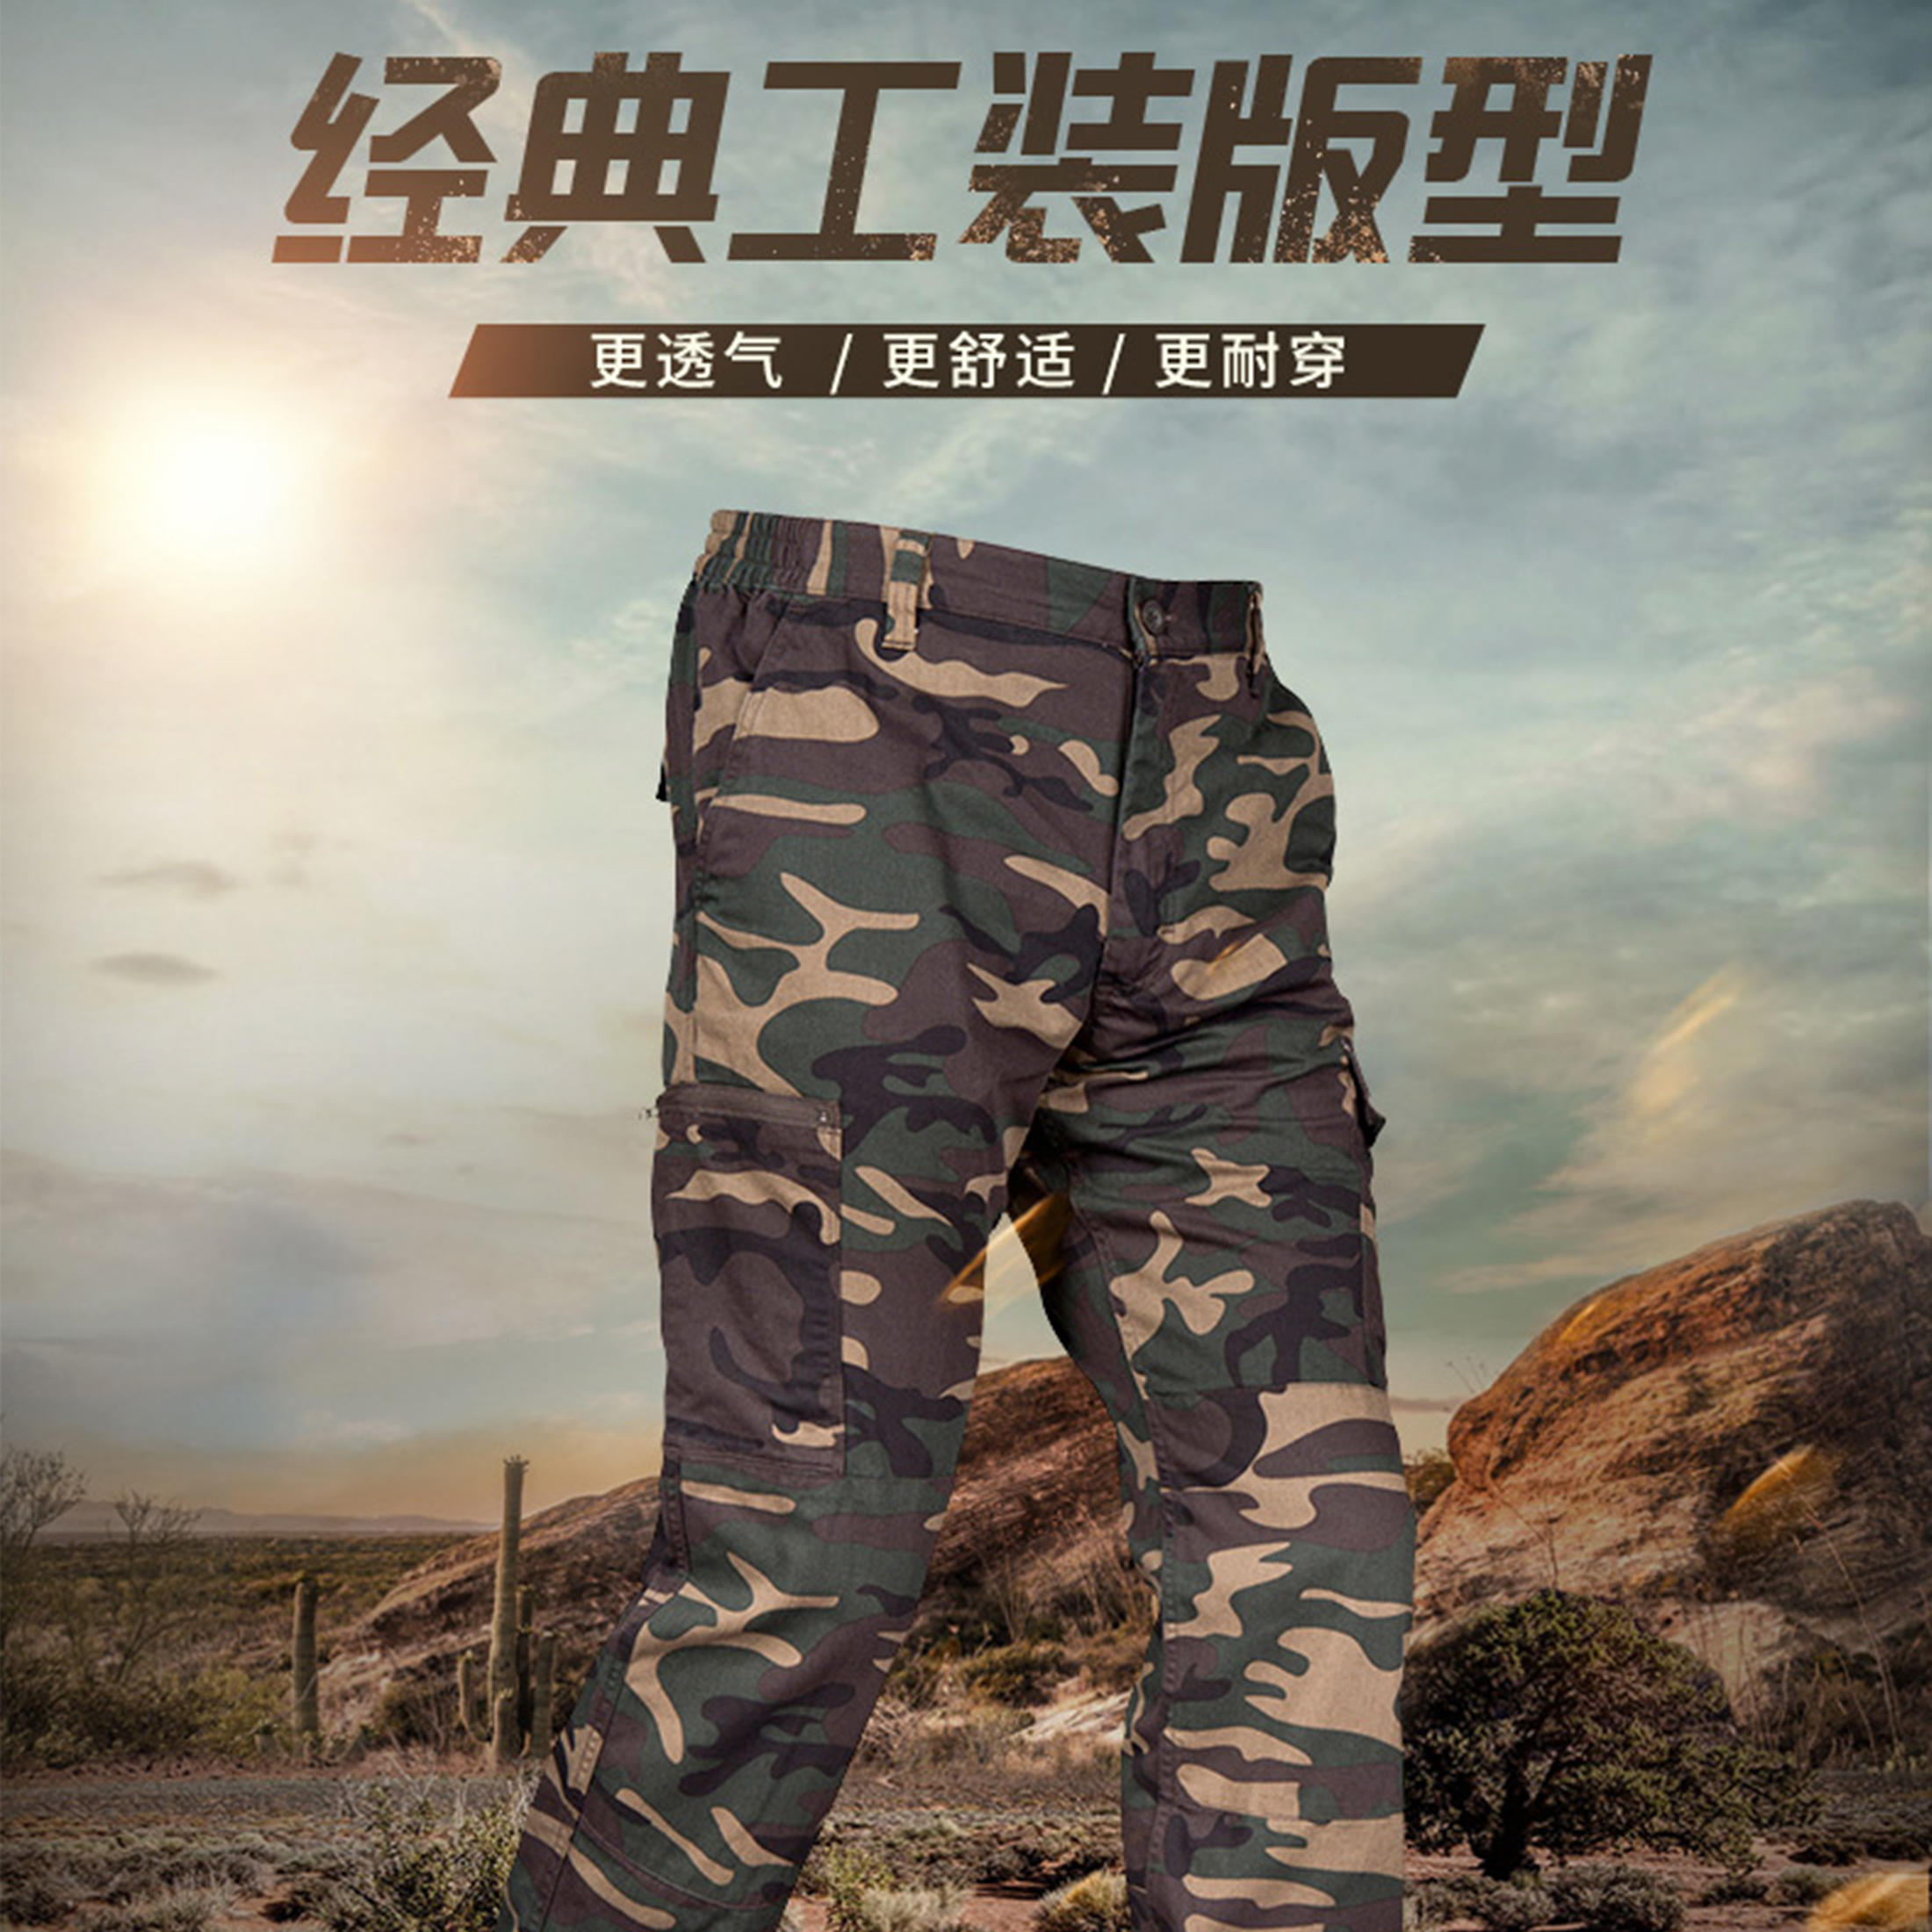 Samiia Boutique - The best seller army pants are back in stock !! Funkiest  look #trend #military #army #pants #baggy #trends #look #trends #samiia  #samiiastyle #ootd #outfit #outfits #nightout #newpost #newset Online